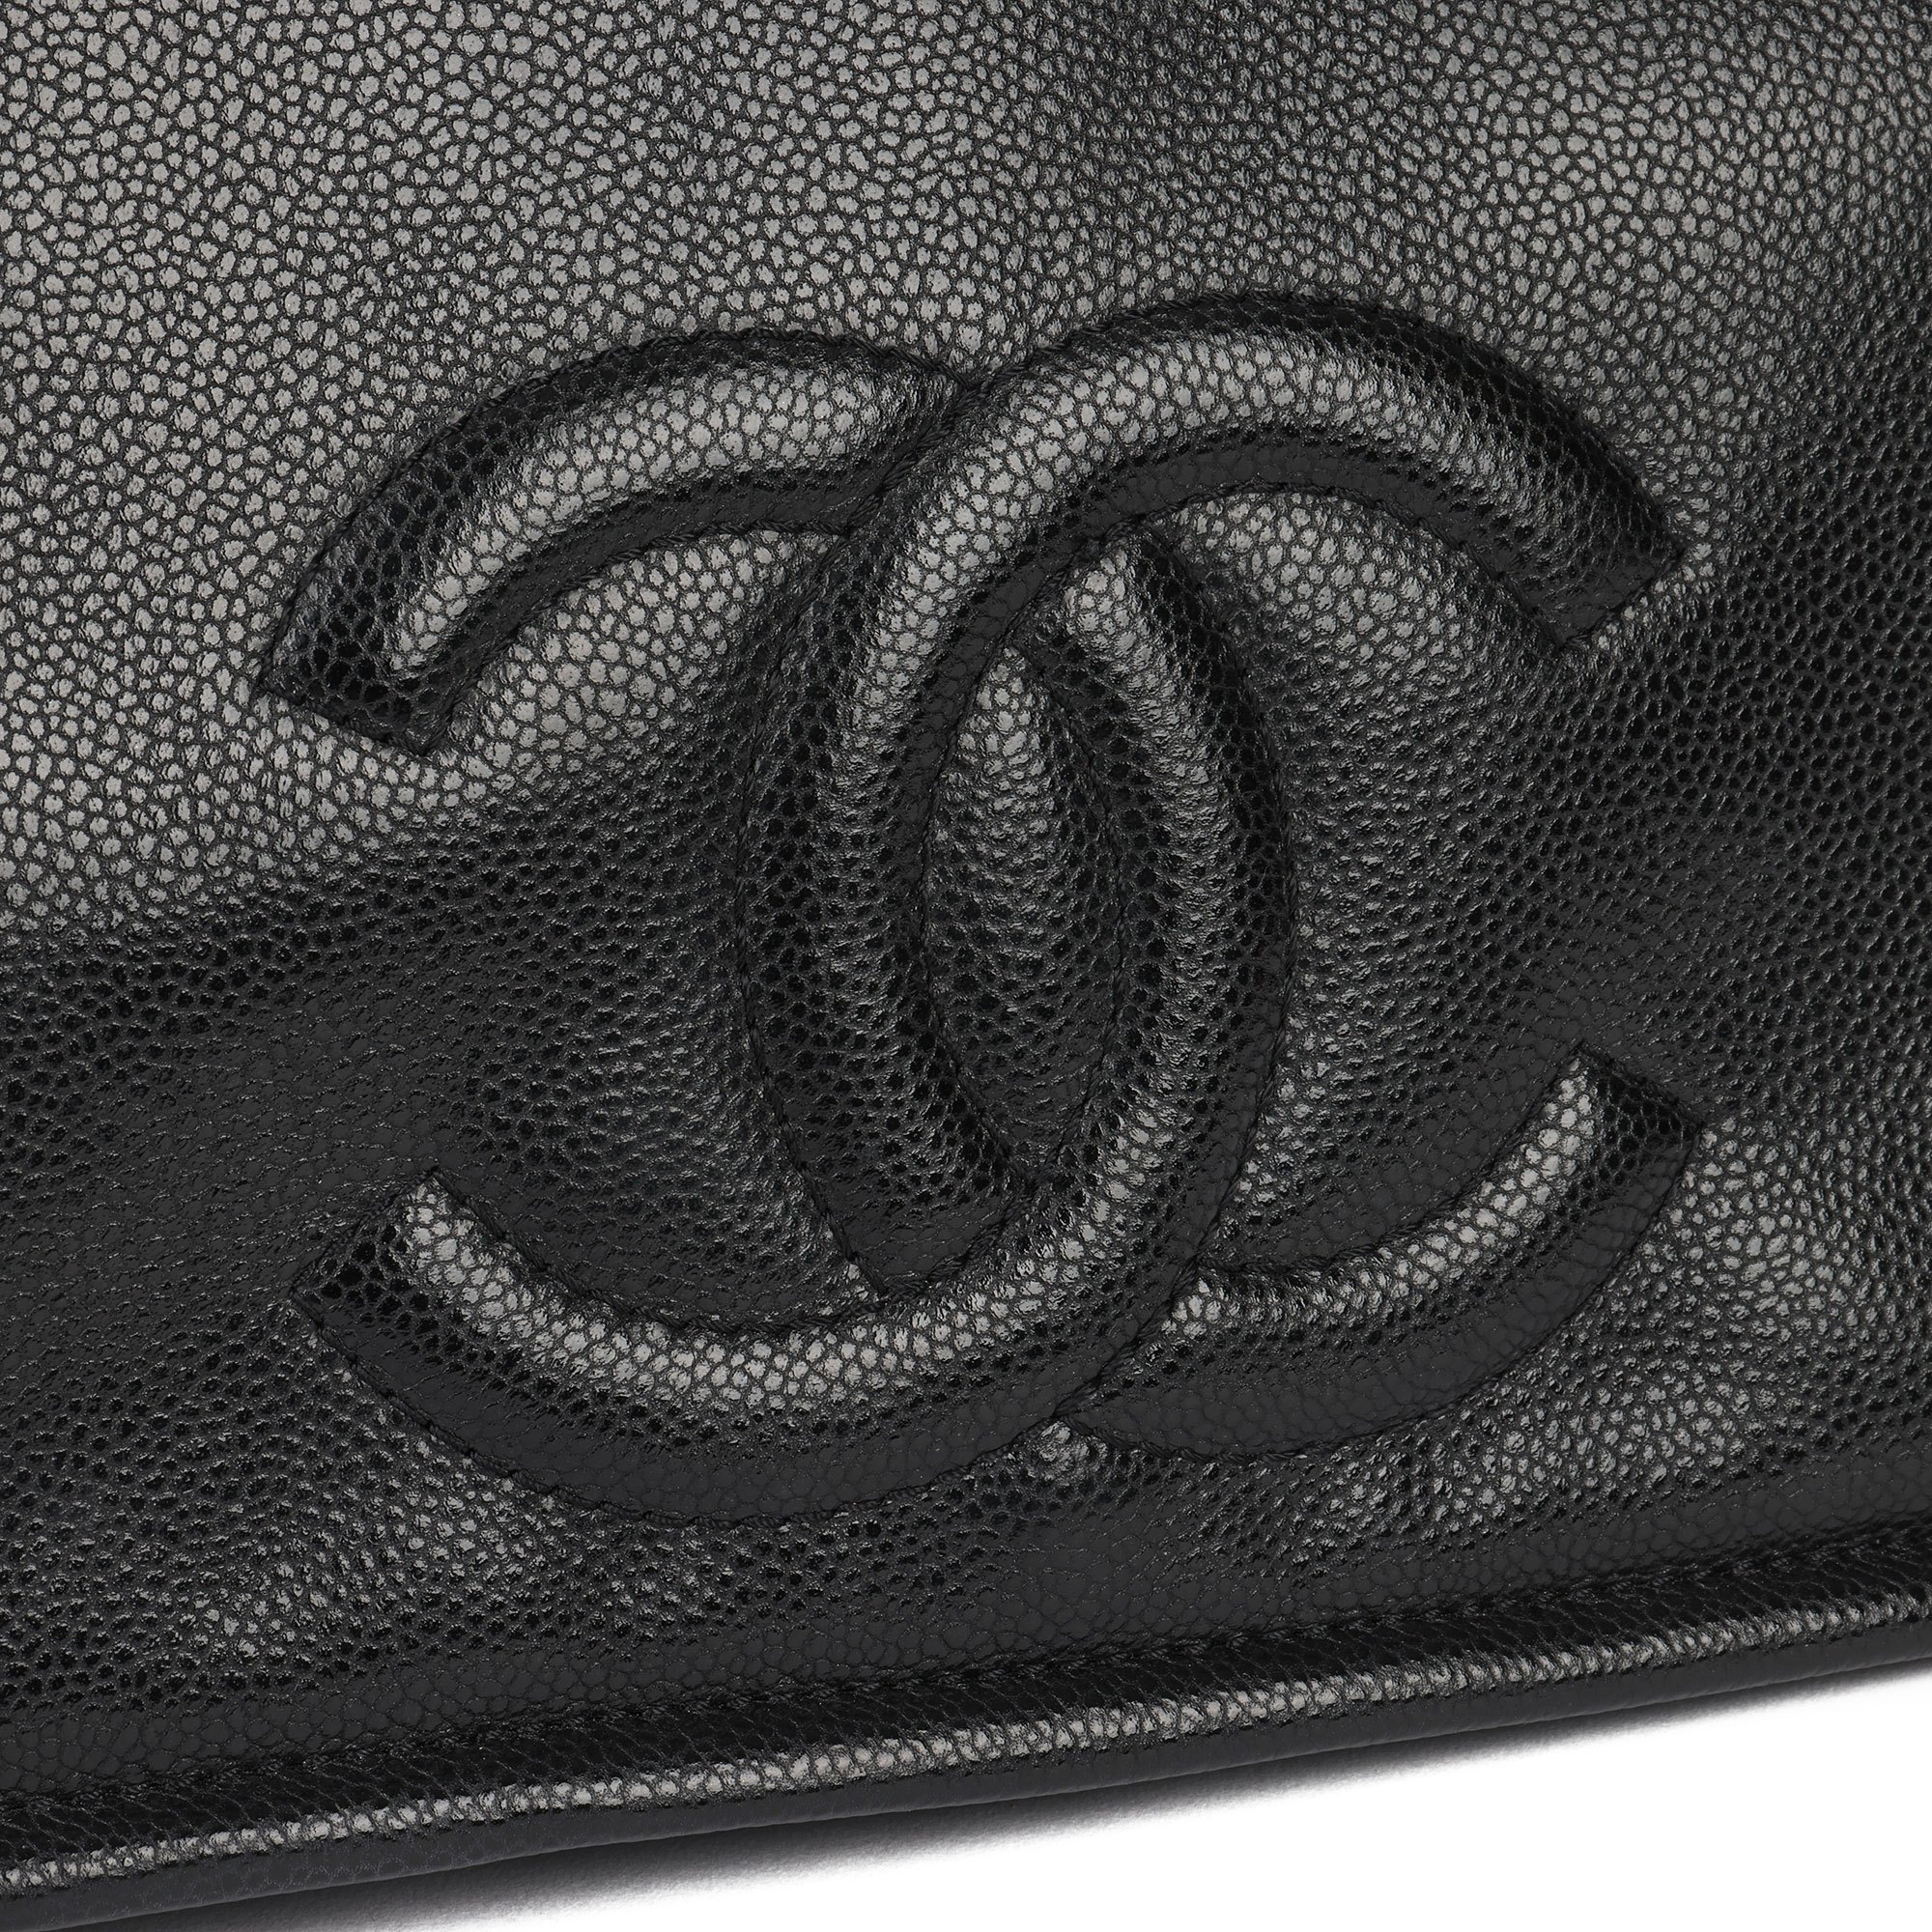 Chanel Black Quilted Caviar Leather Timeless Single Flap Bag